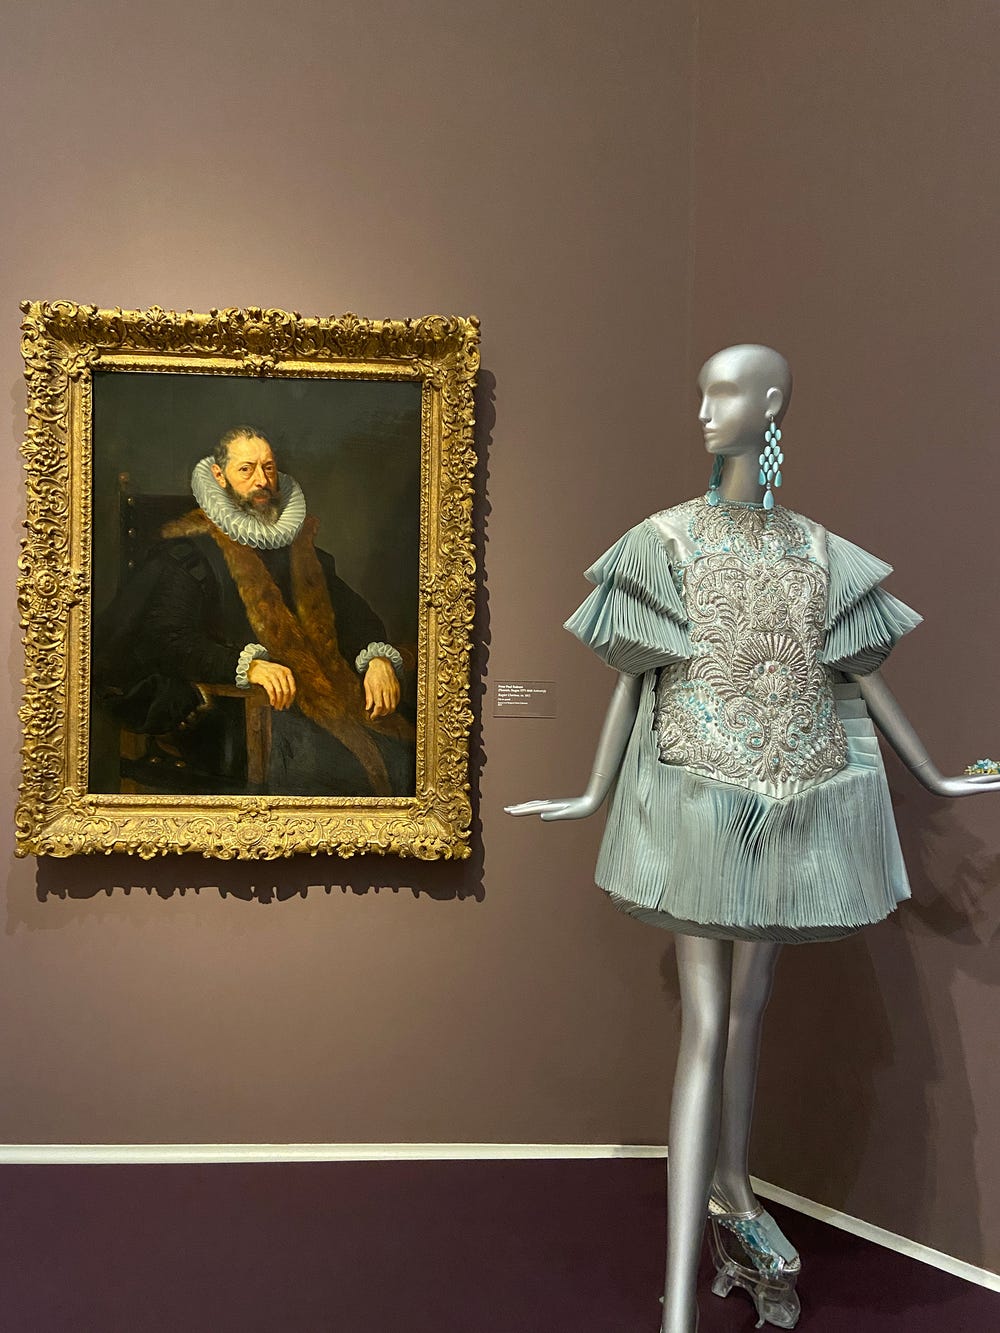 couture gown by Guo Pei next to a painting by Peter Paul Rubens